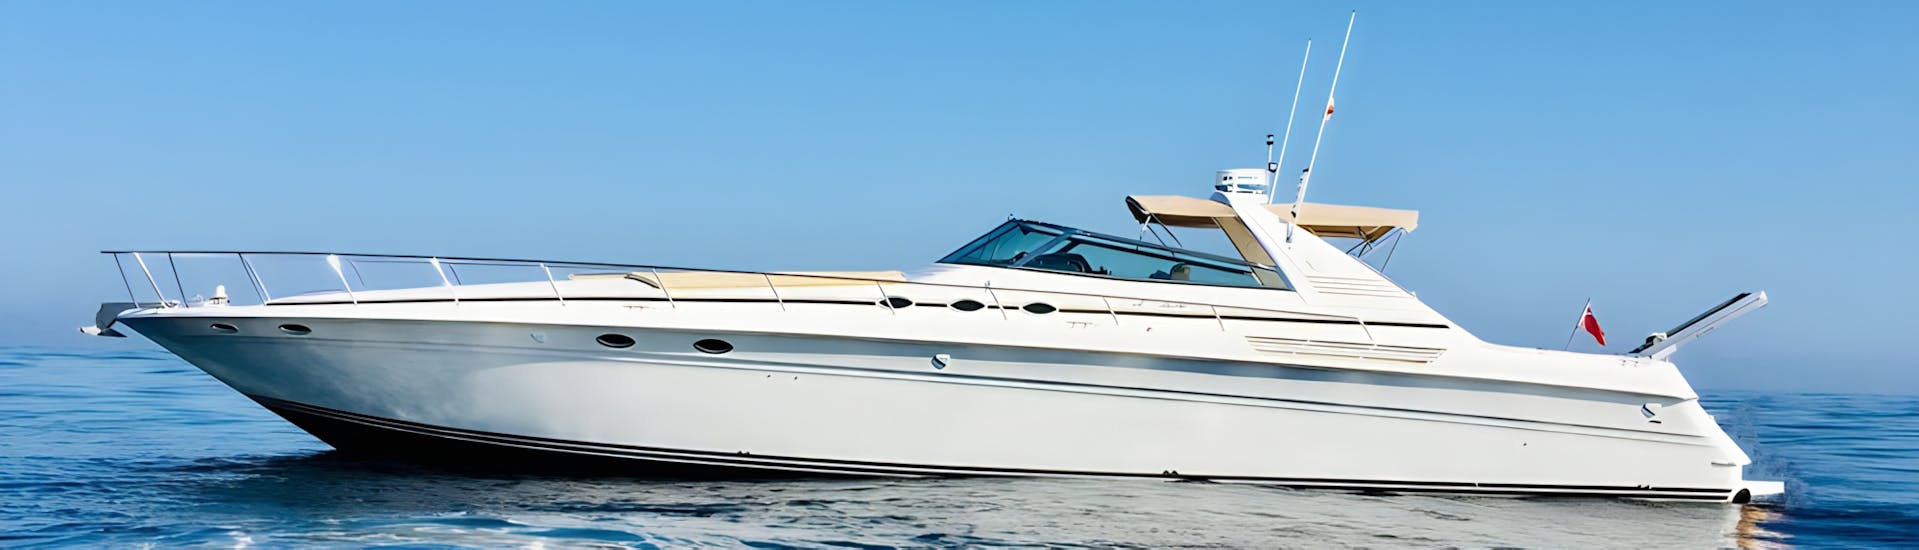 collar Pareja apaciguar ▷ Luxury Boat Rental in Marbella with Skipper (up to 11 people) from 2239 €  - CheckYeti